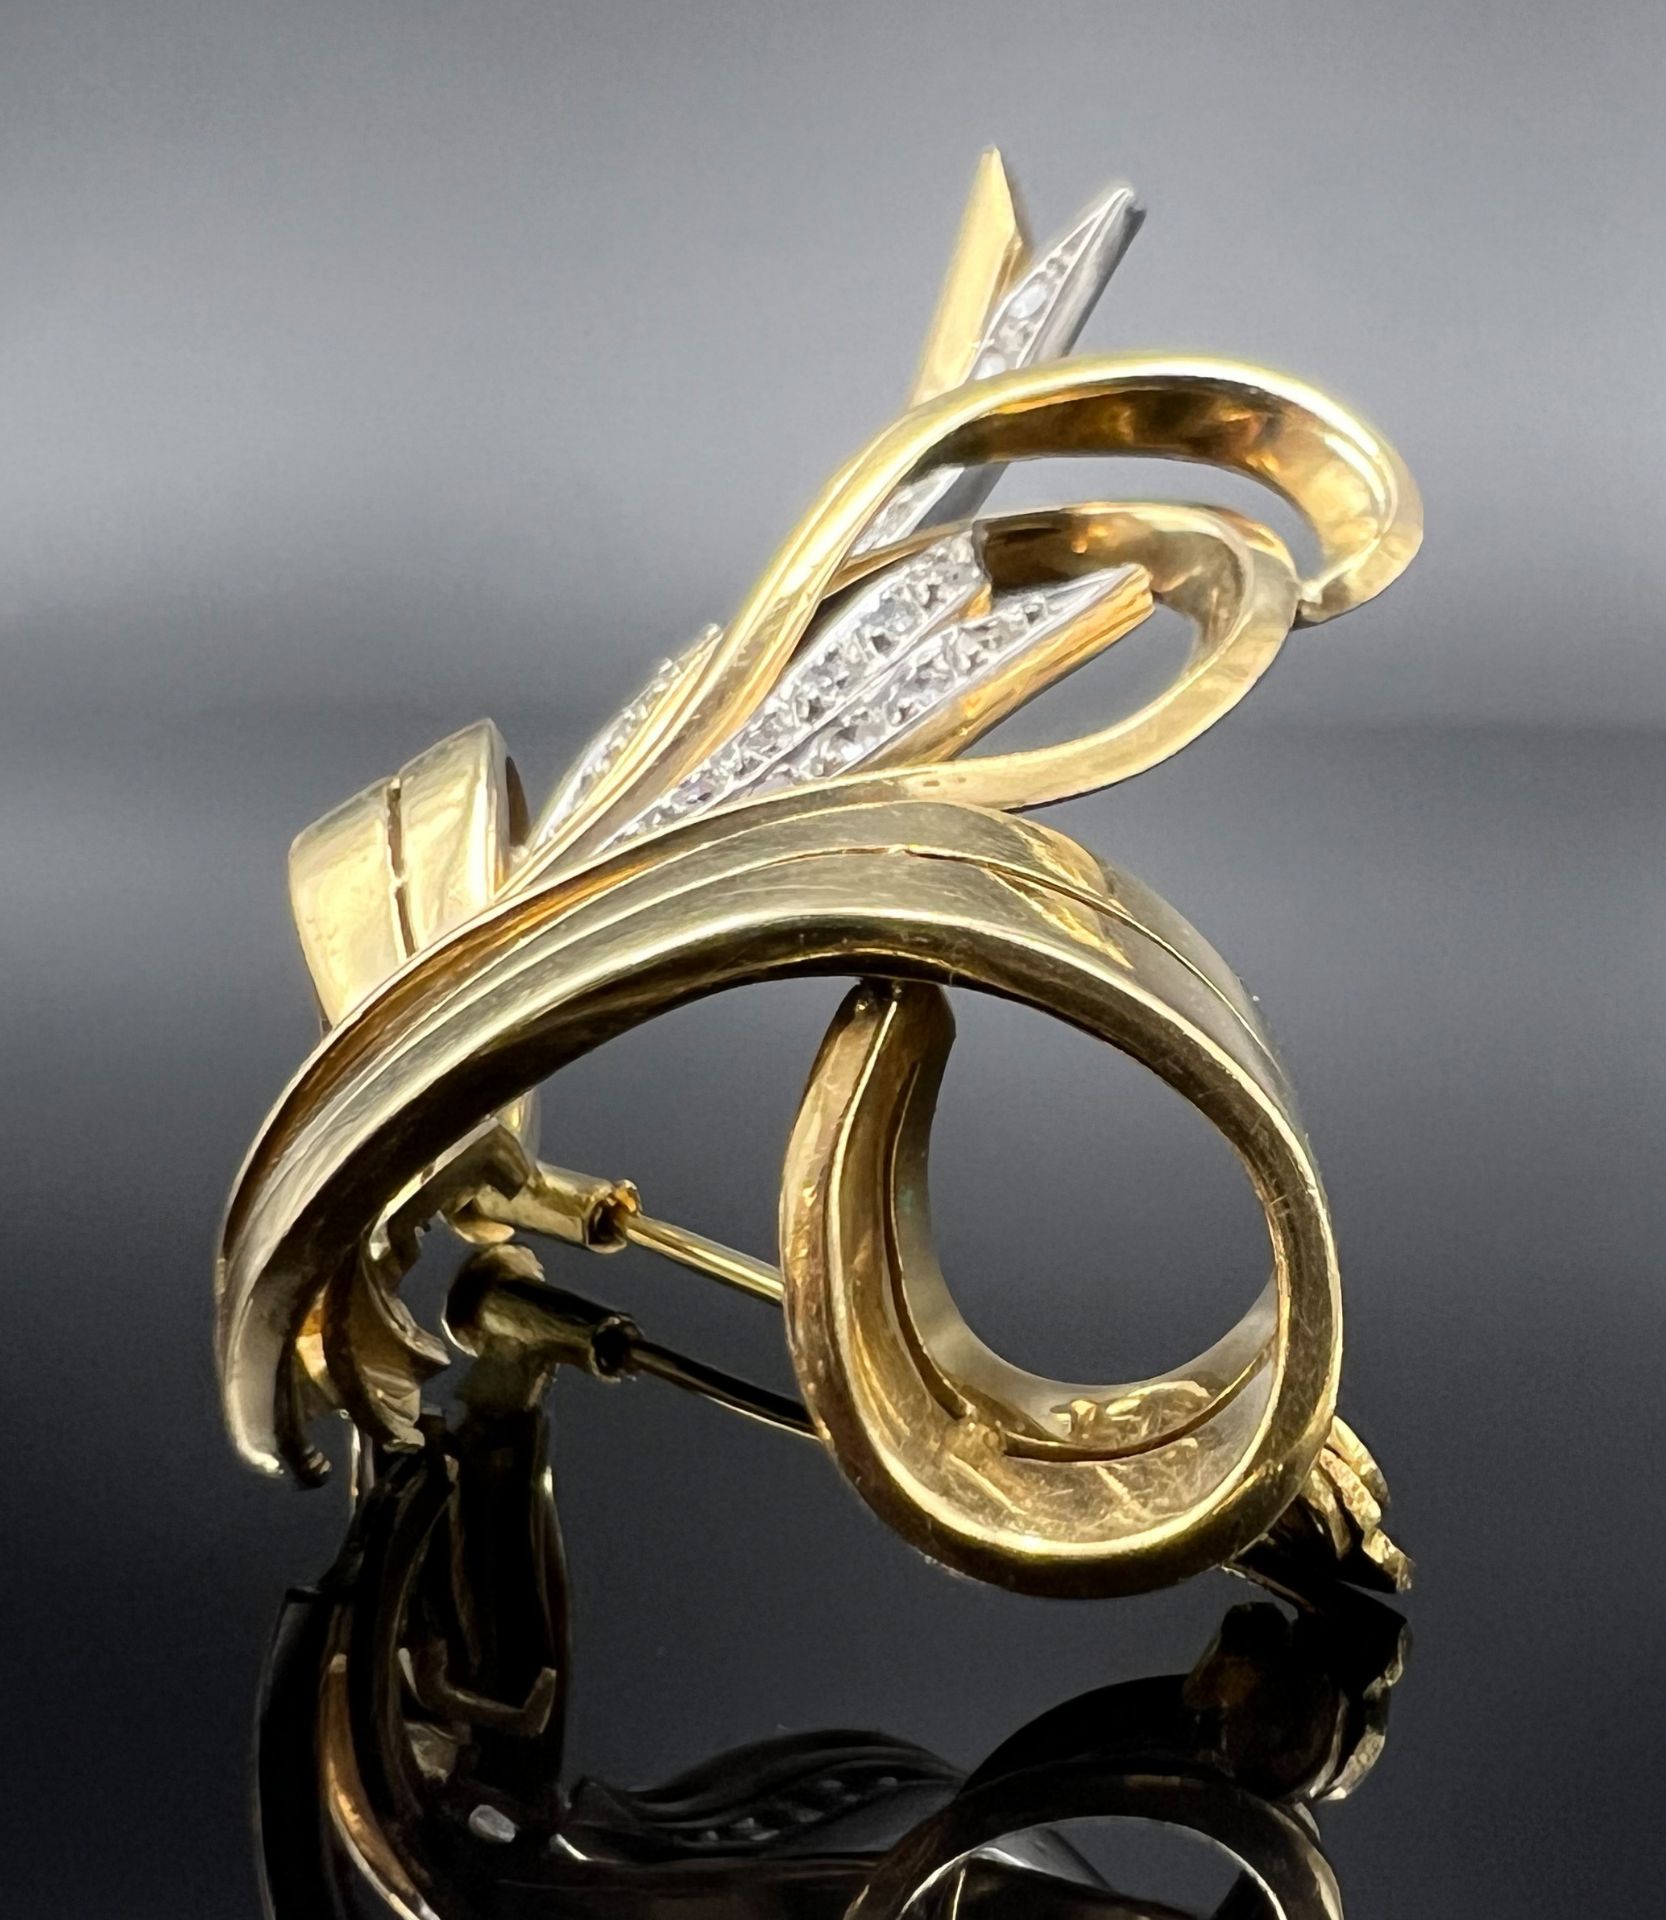 Loop-shaped brooch 750 yellow gold and white gold with diamond setting. - Image 3 of 7